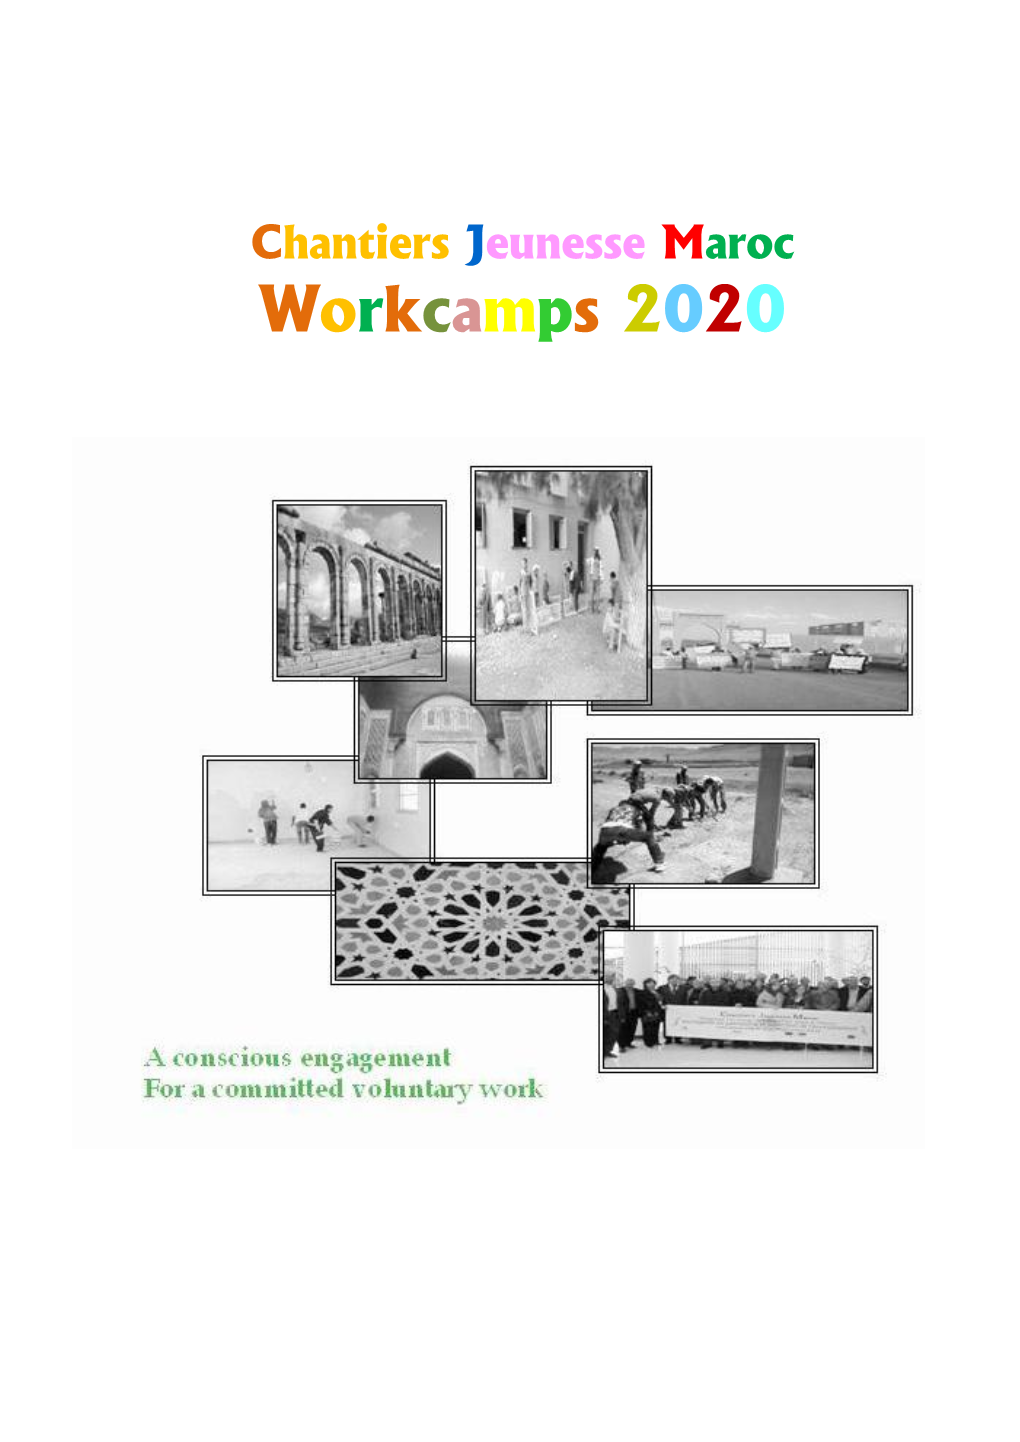 Workcamps 2020